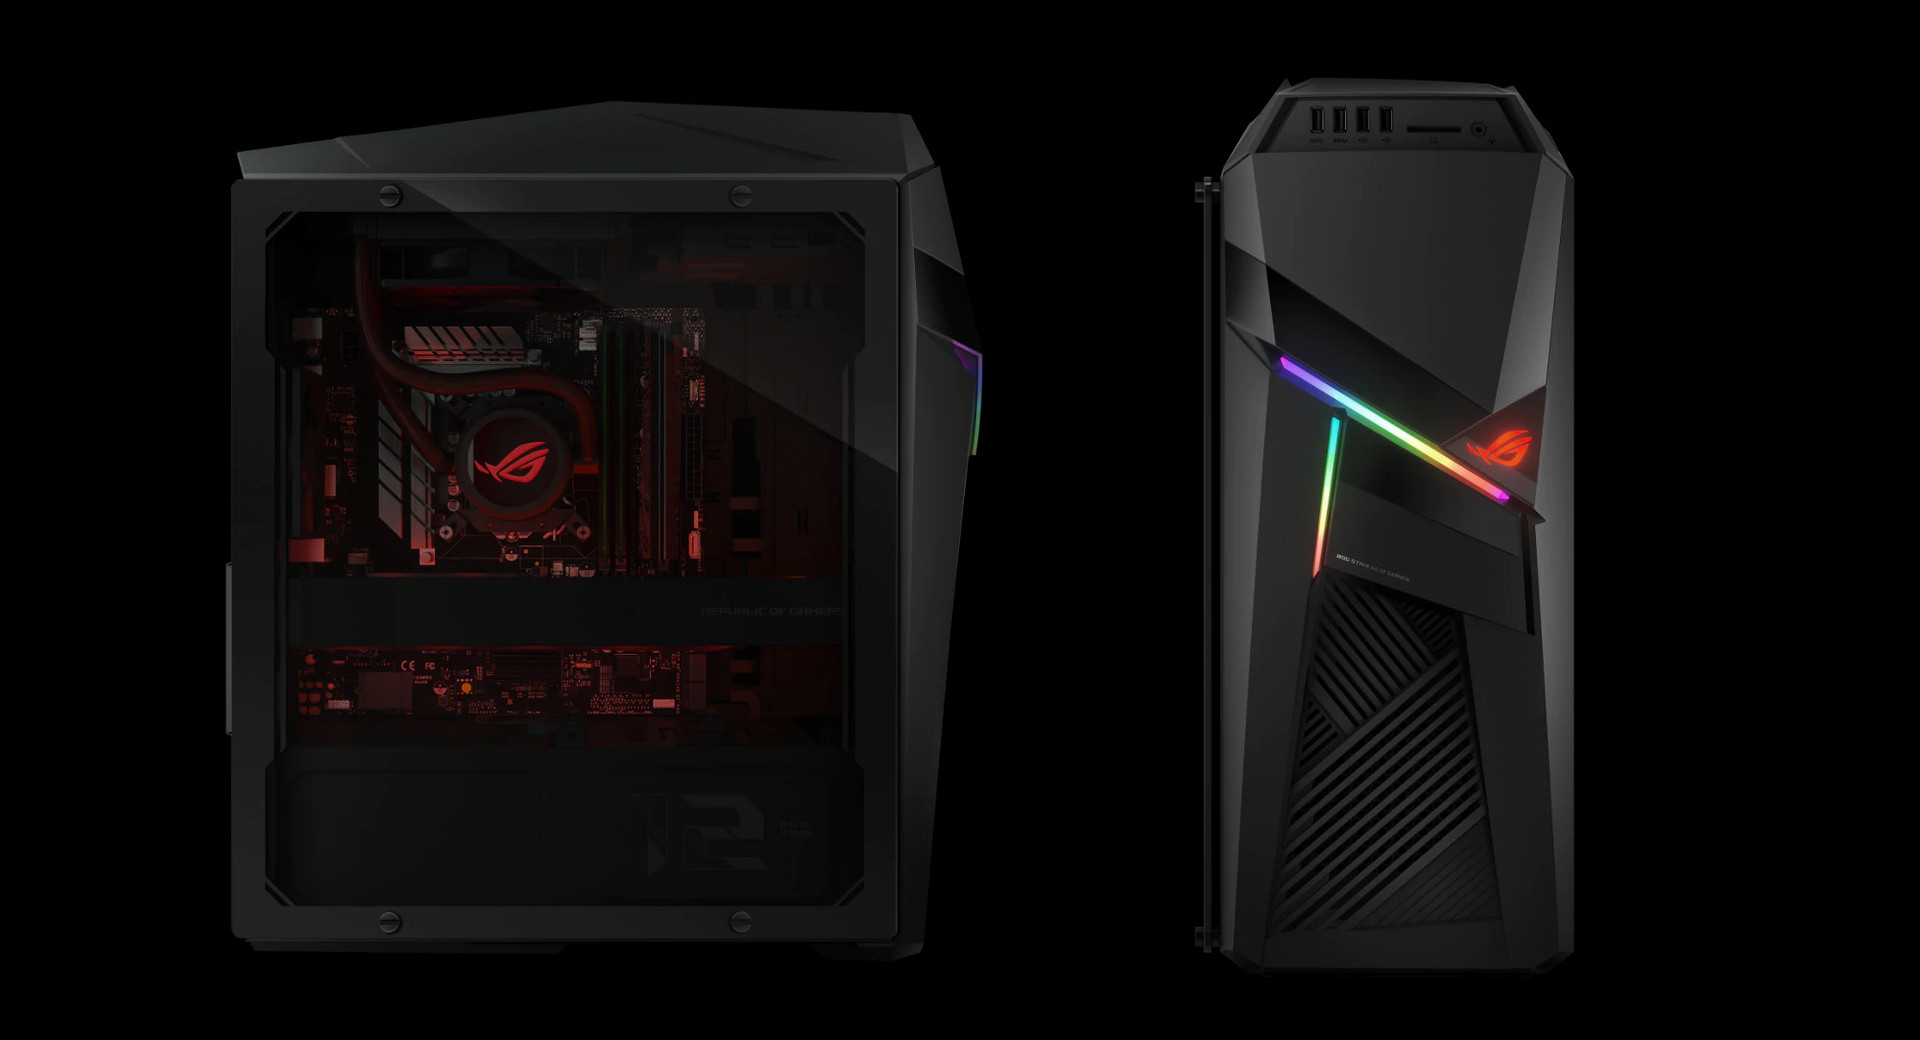 Asus introduces the ROG Strix GL12CX Gaming Desktop powered by the 